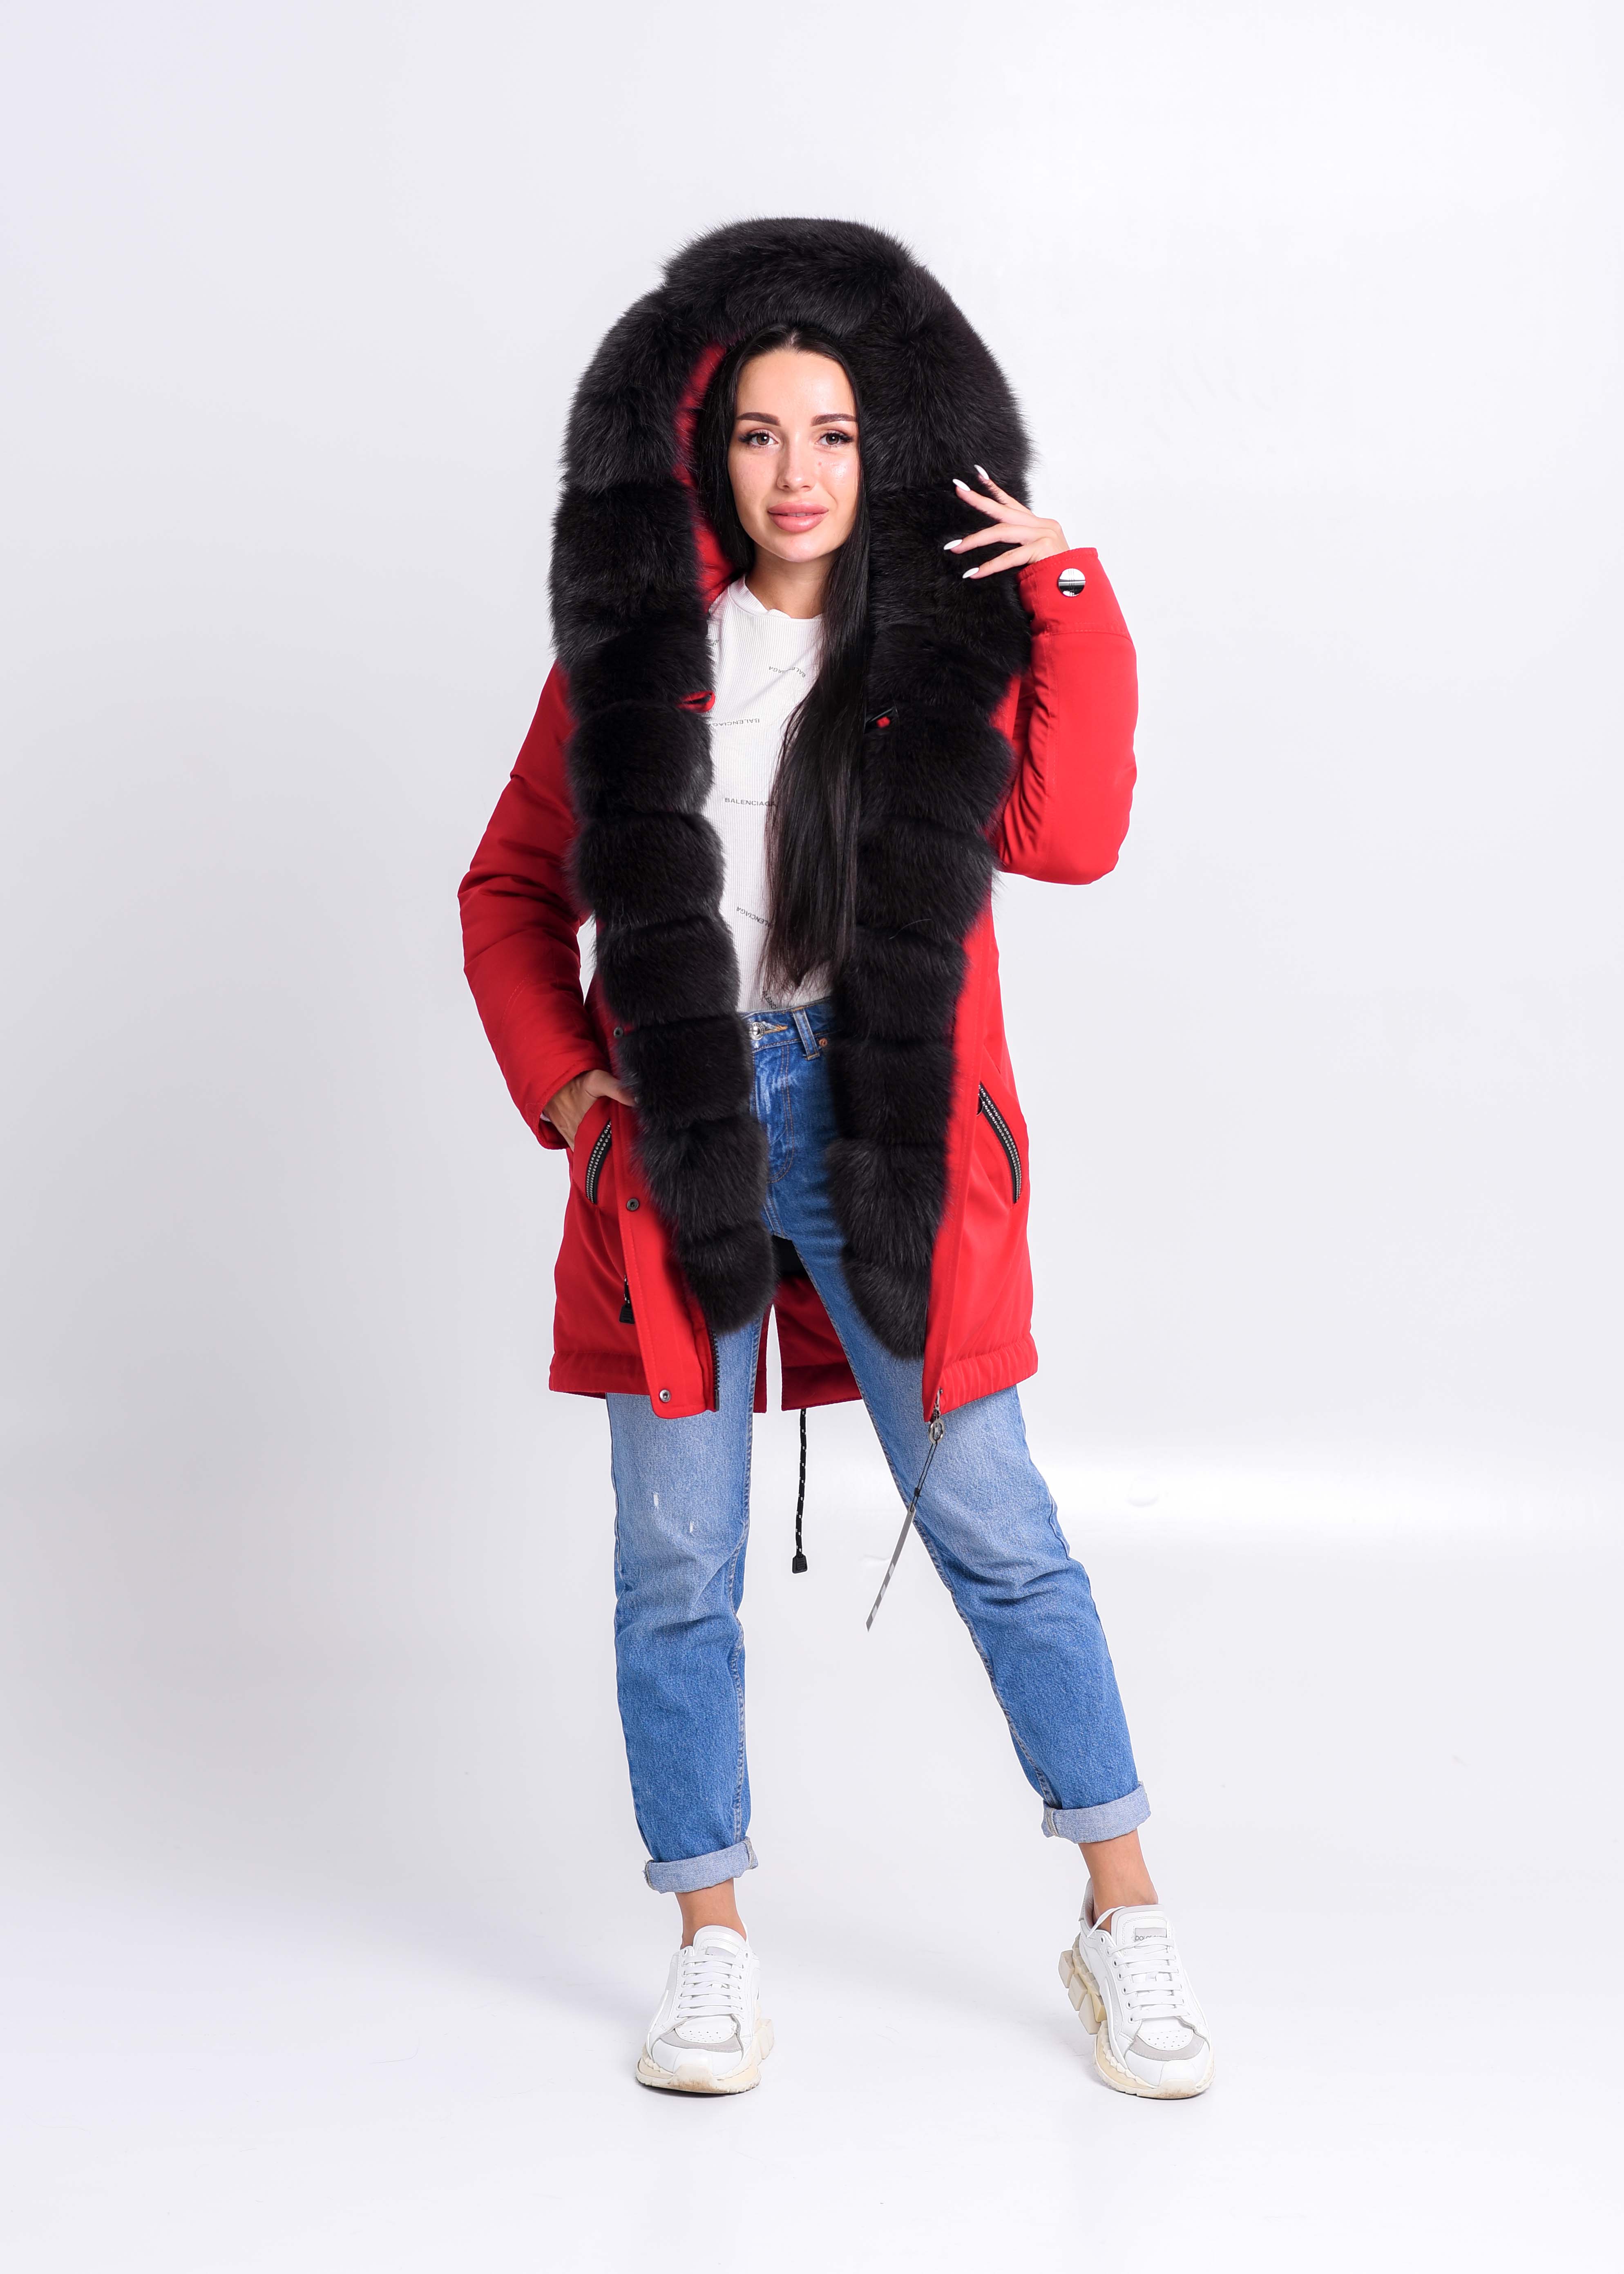 Women's winter parka in red color with sable fur